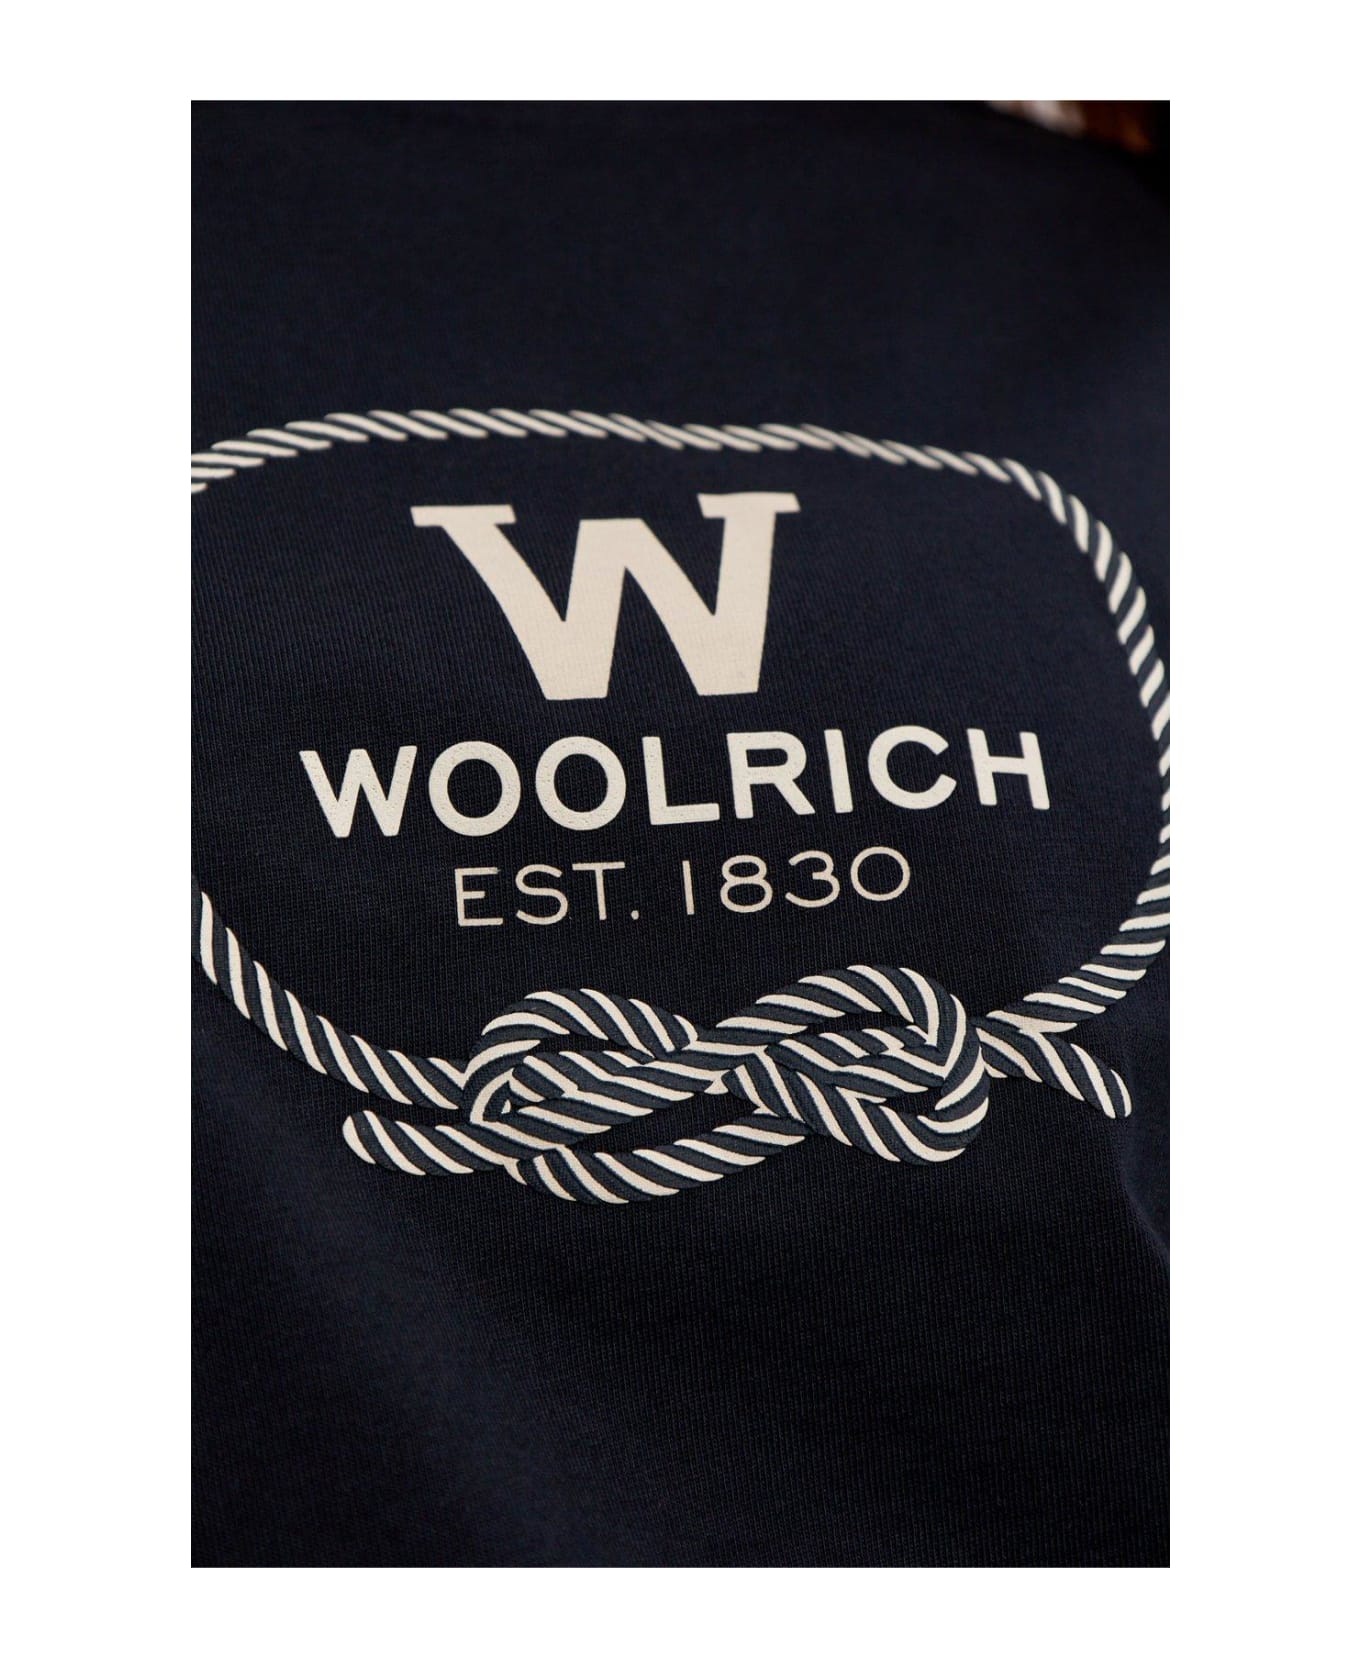 Woolrich Graphic Printed Oversized T-shirt